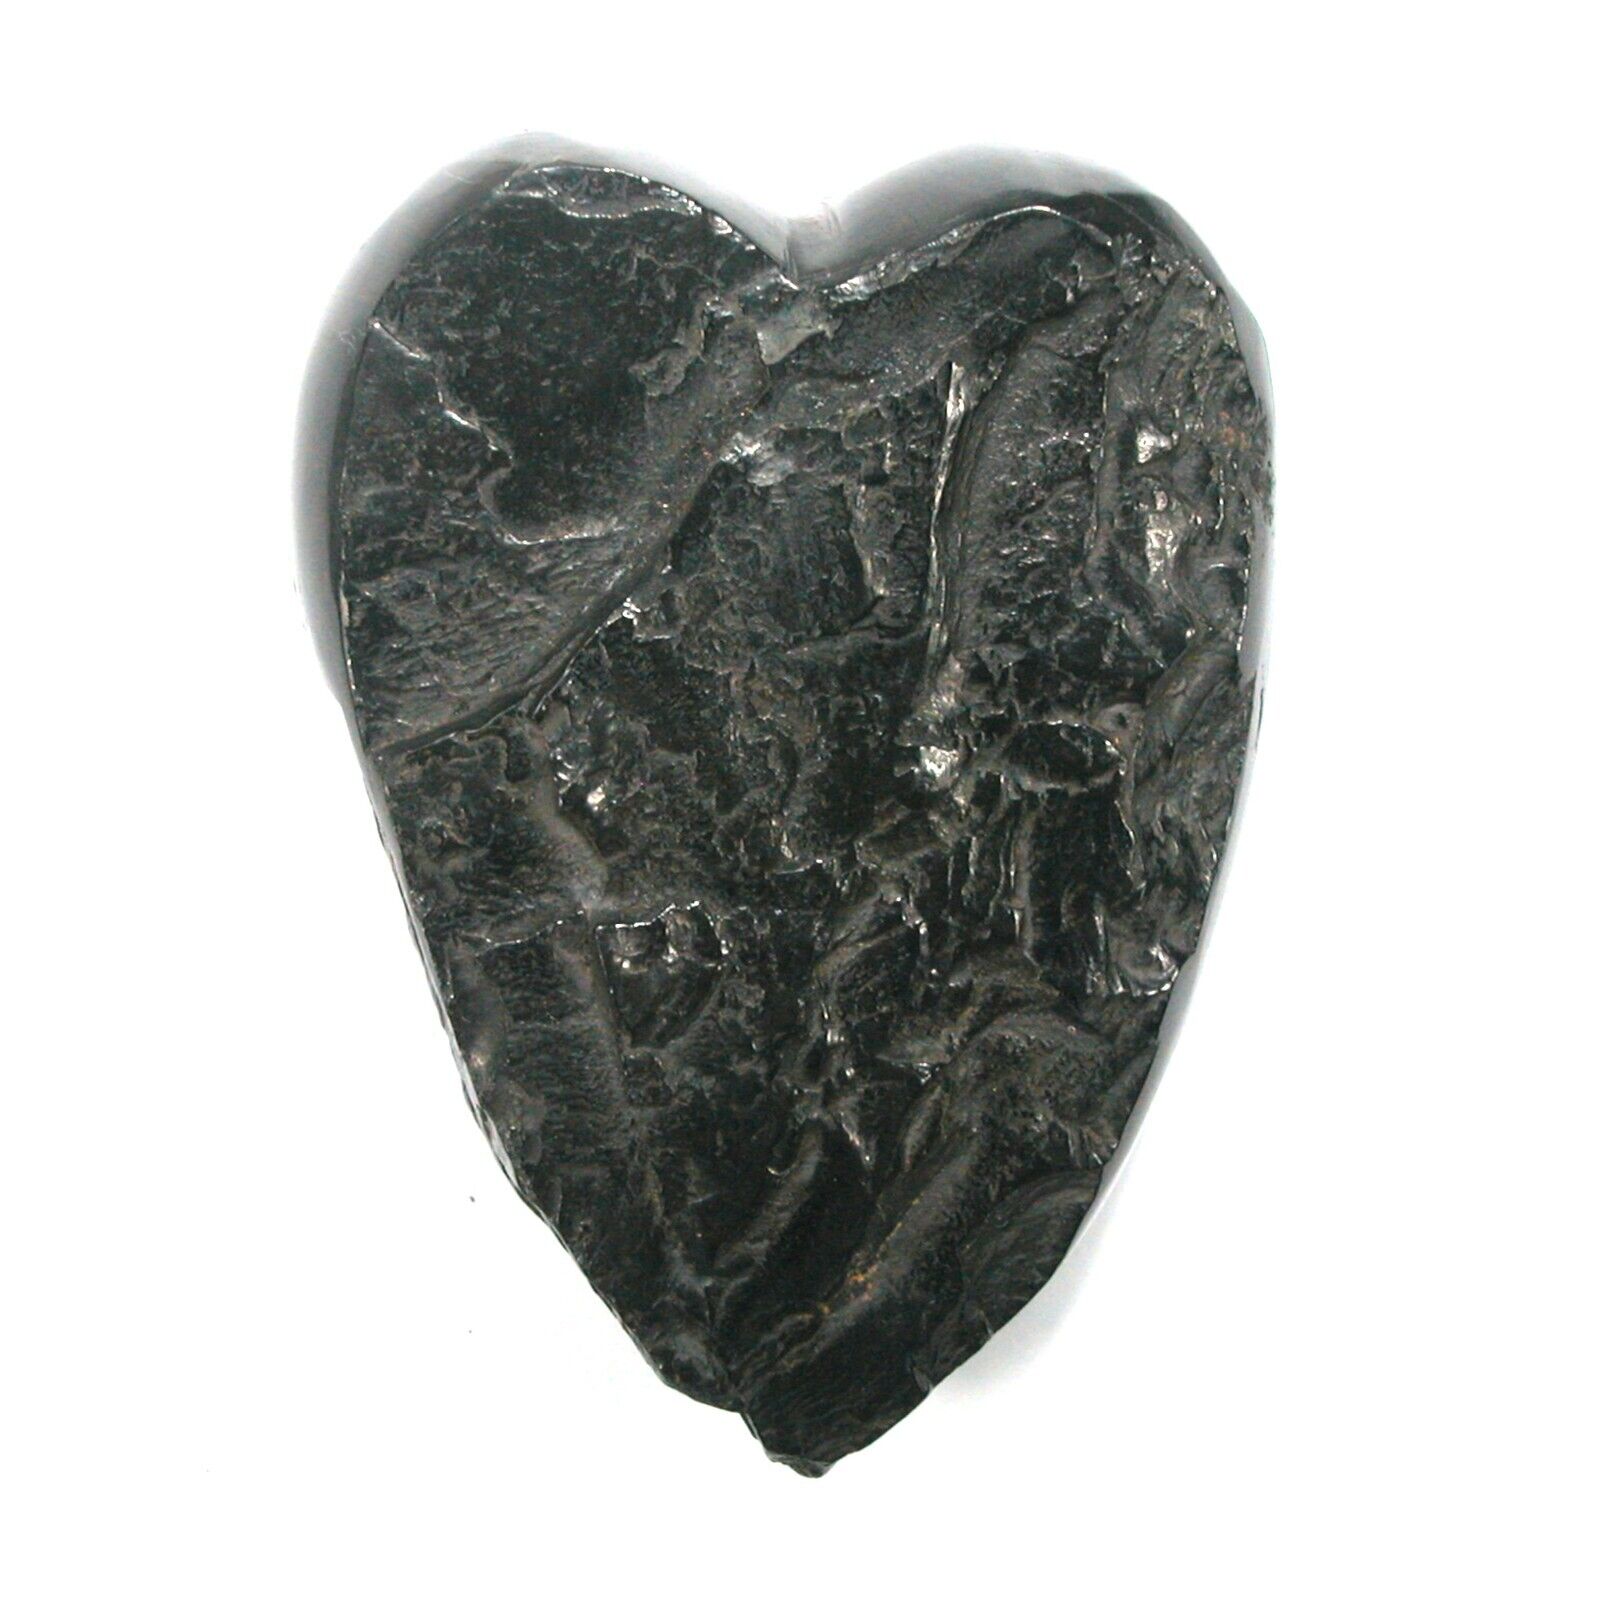 DVH 76g US Shungite Bitumino Coal Heart Fossil Fuel Climate Grief Healing (4592)